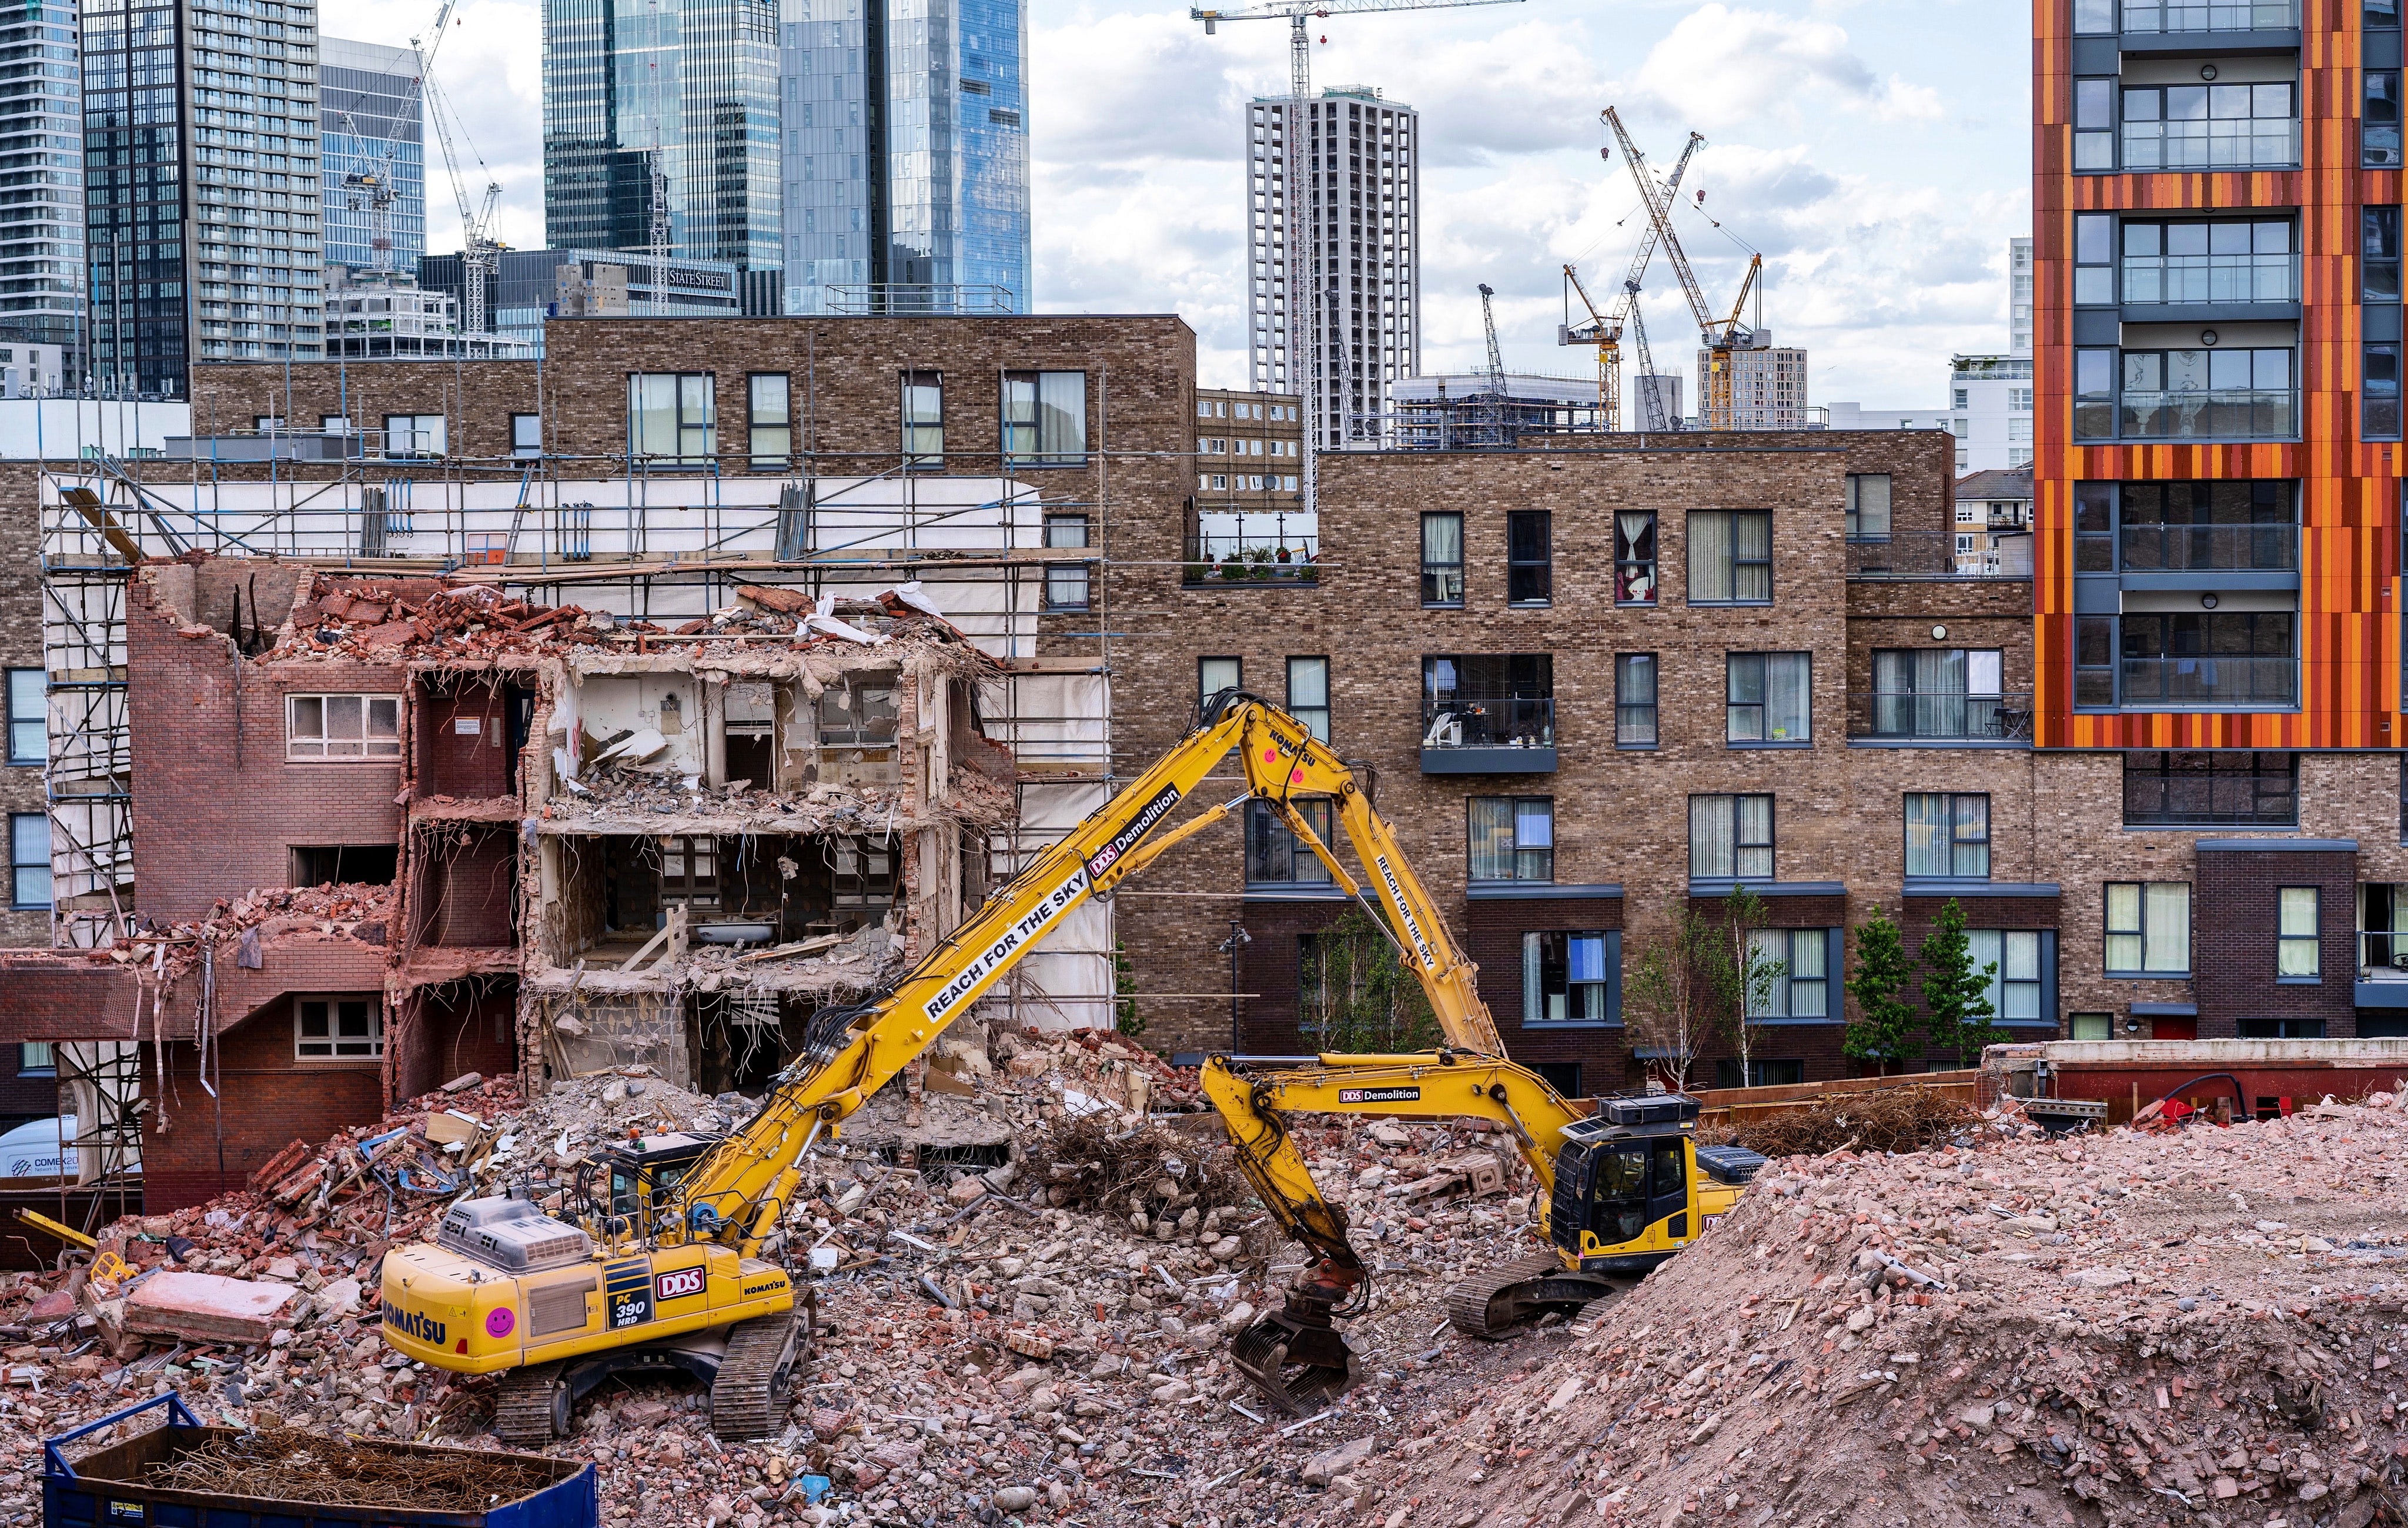 A digger on an urban construction site featuring new homes and high-rise buildings